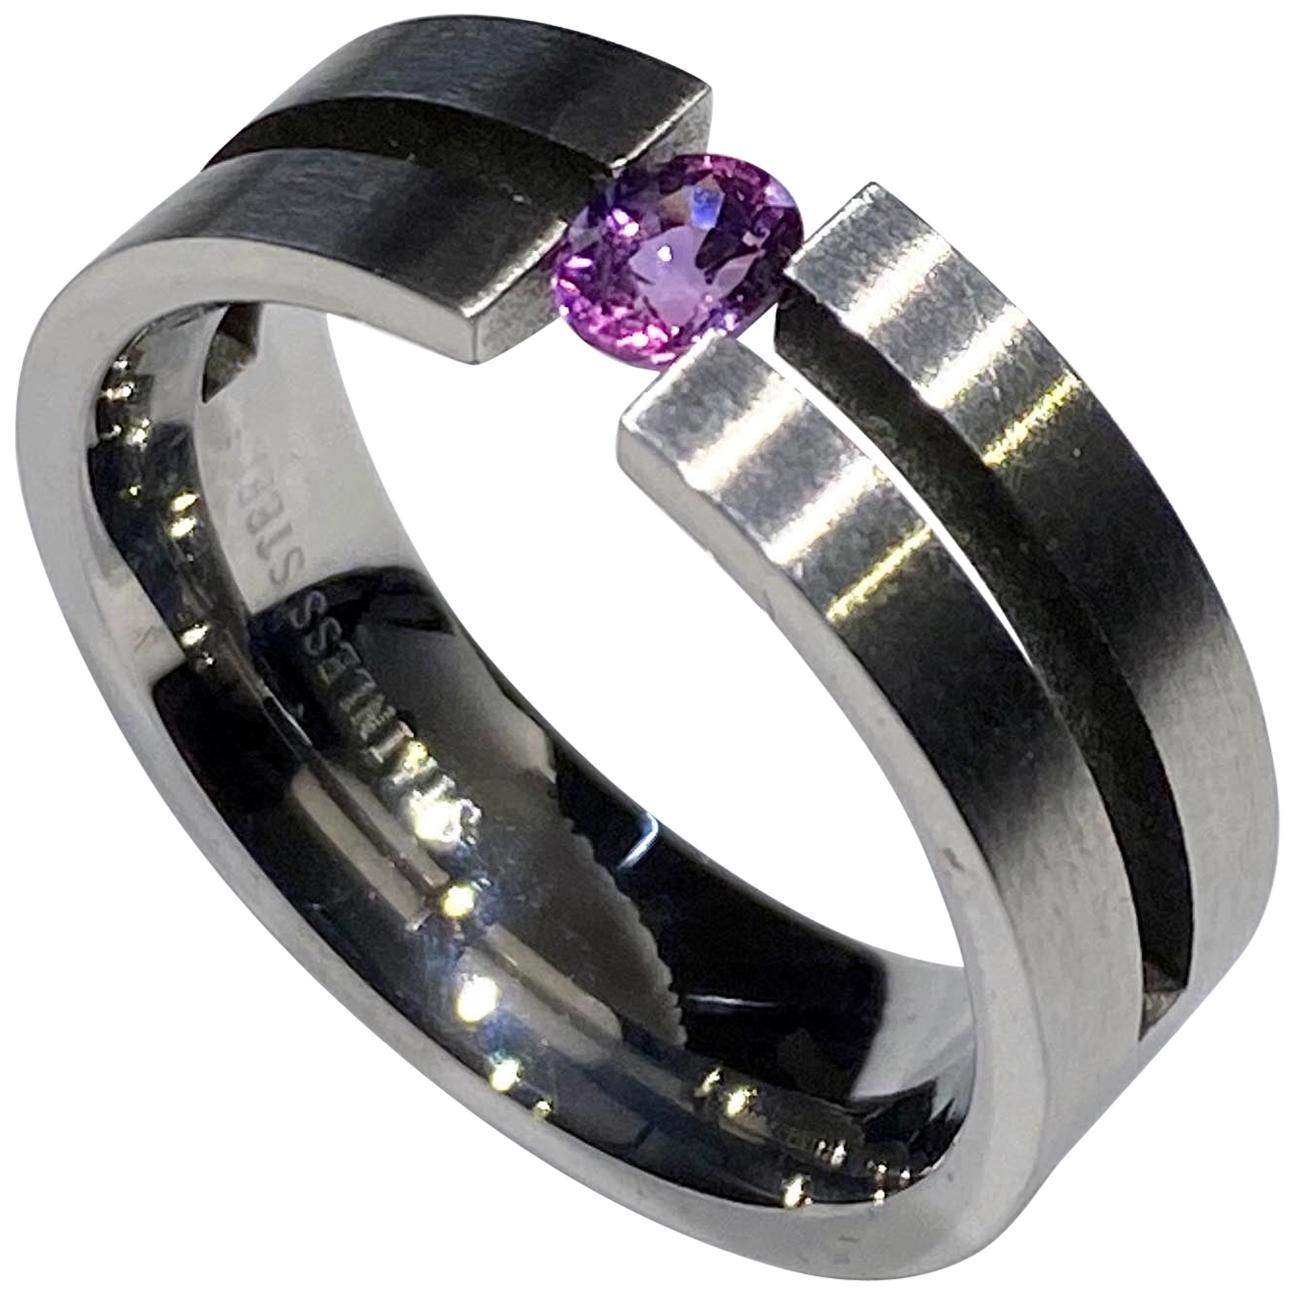 Stainless Steel Tension Ring set with a Purple Sapphire 